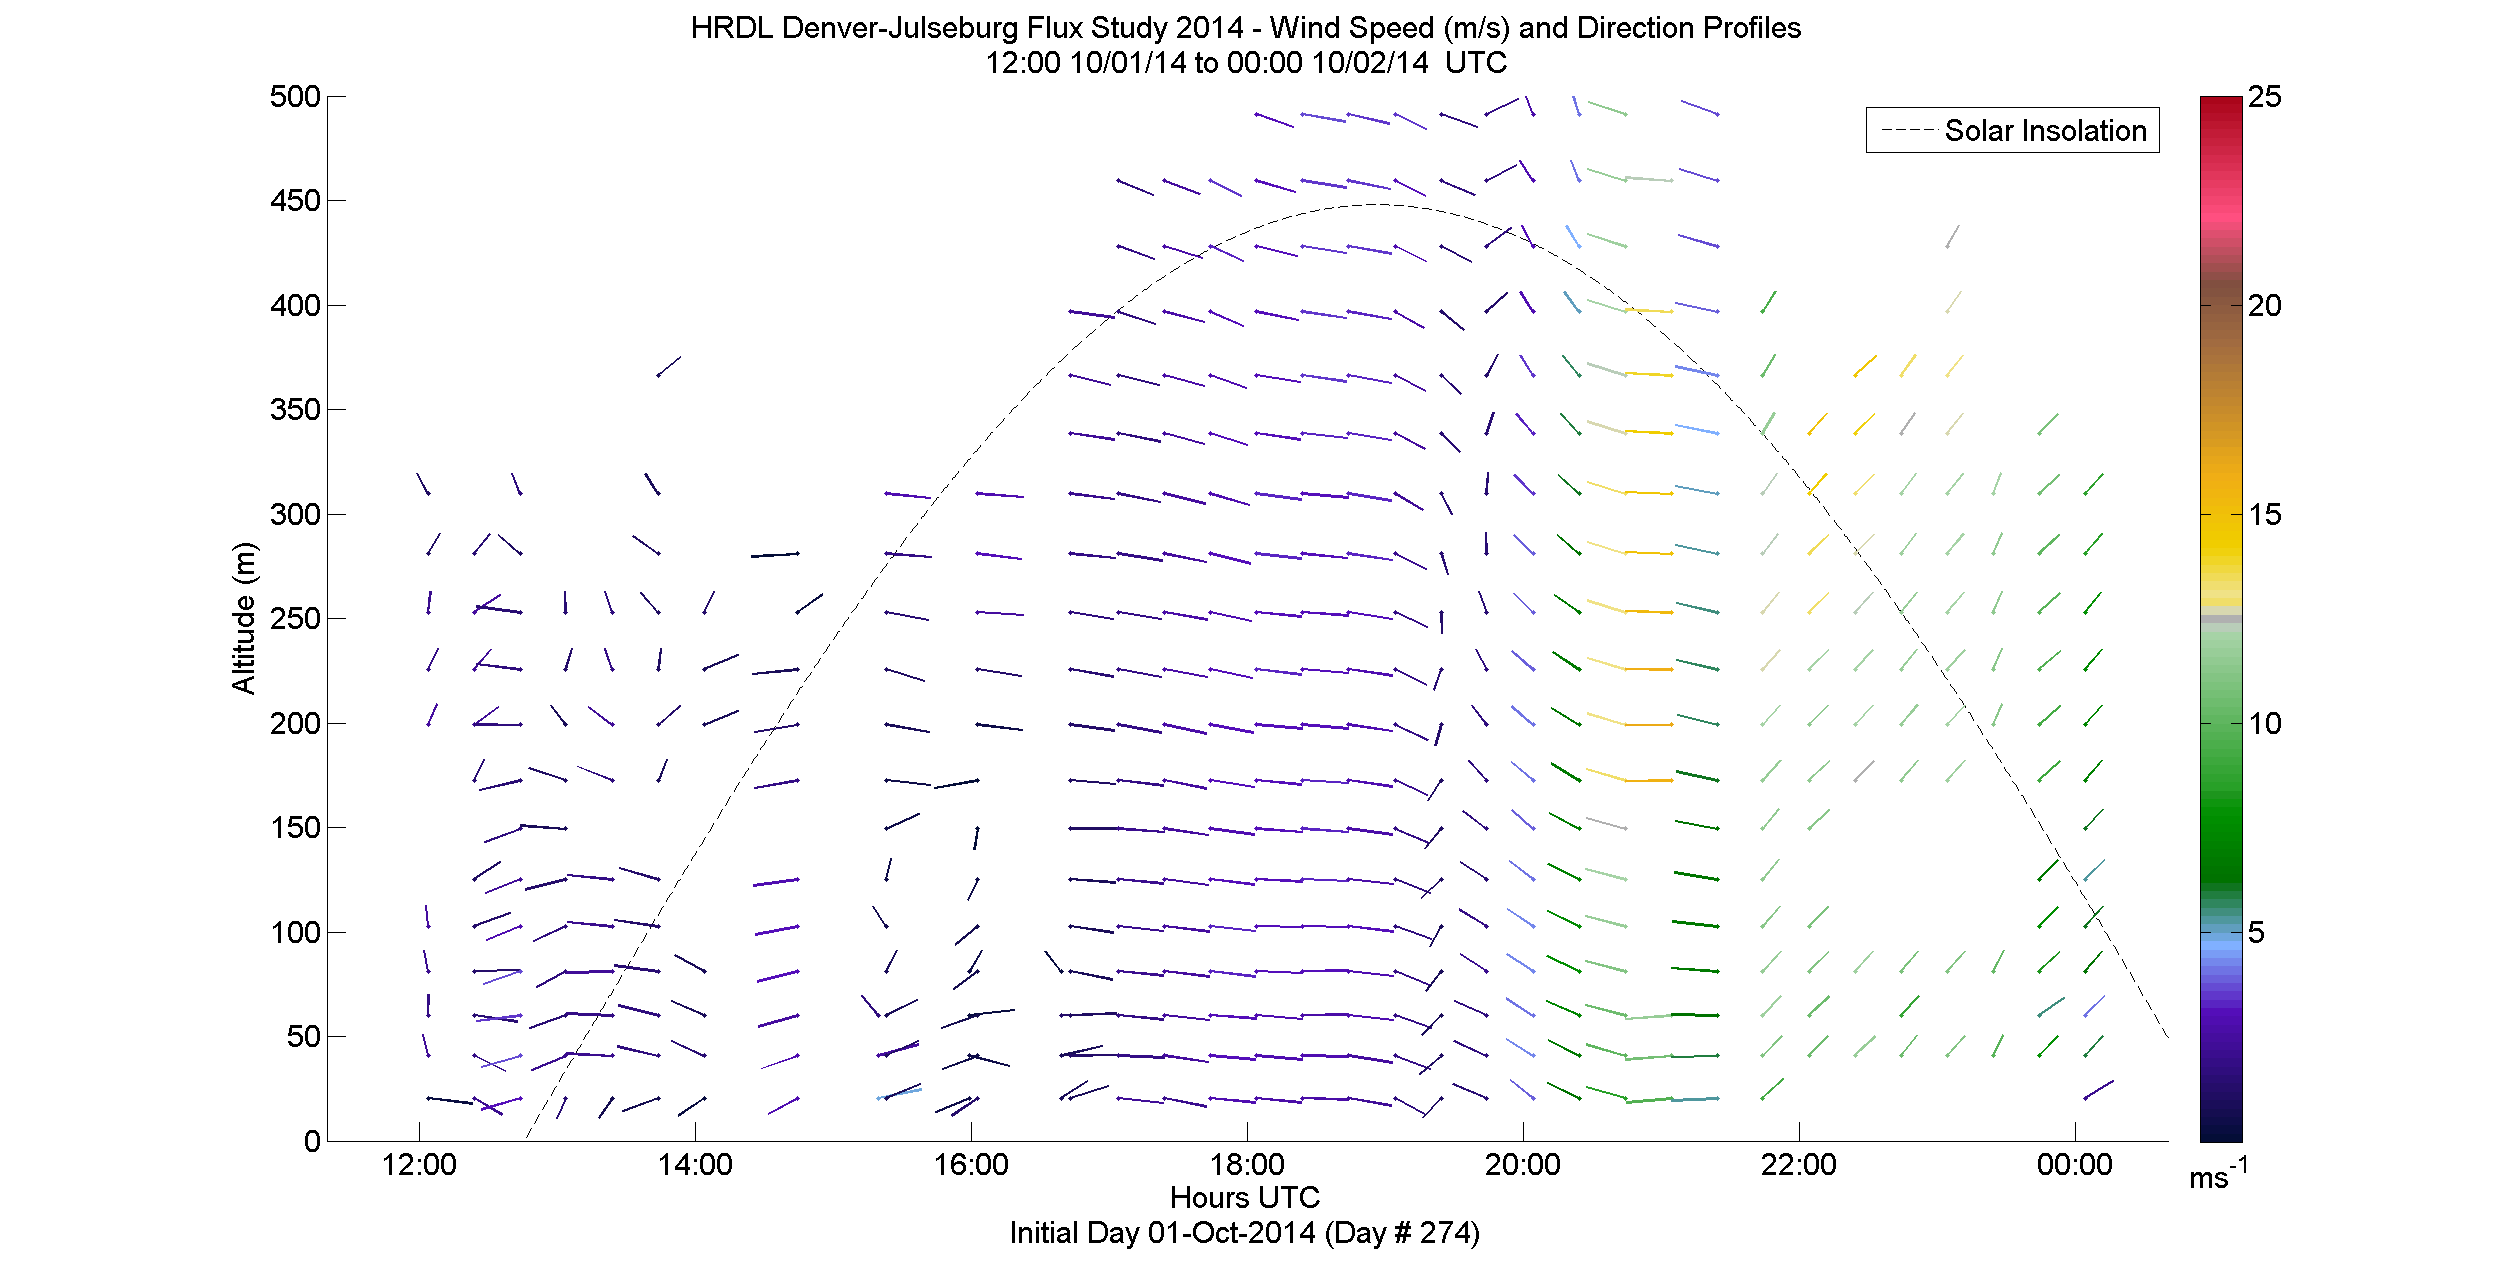 HRDL speed and direction profile - October 1 pm